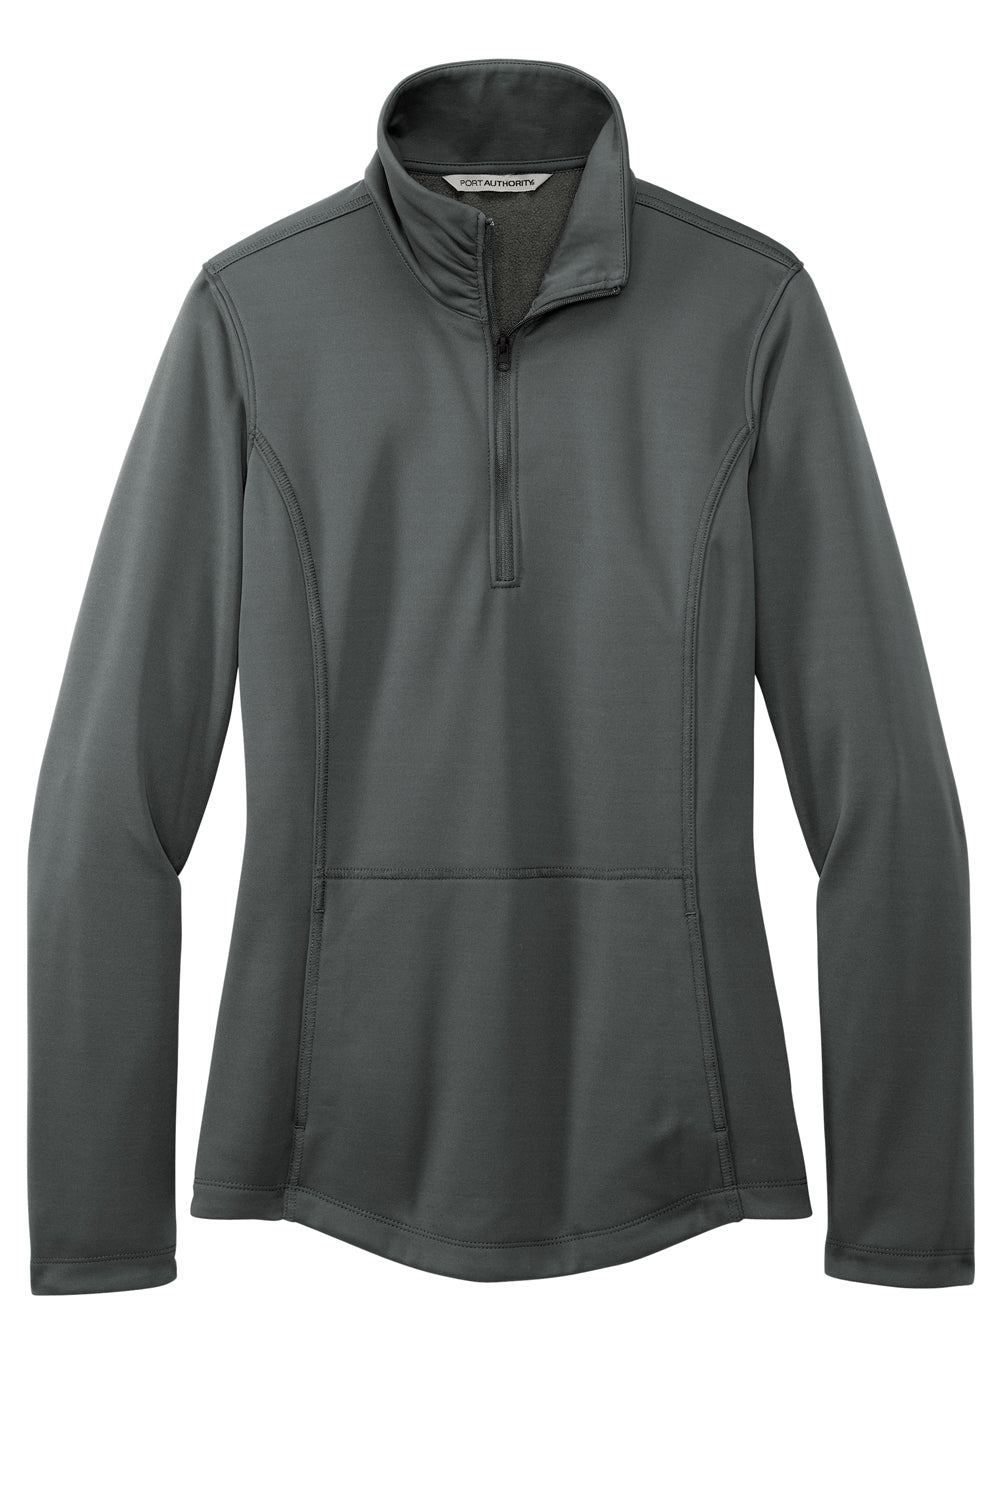 Port Authority L804 Womens Smooth Fleece 1/4 Zip Hooded Jacket Graphite Grey Flat Front